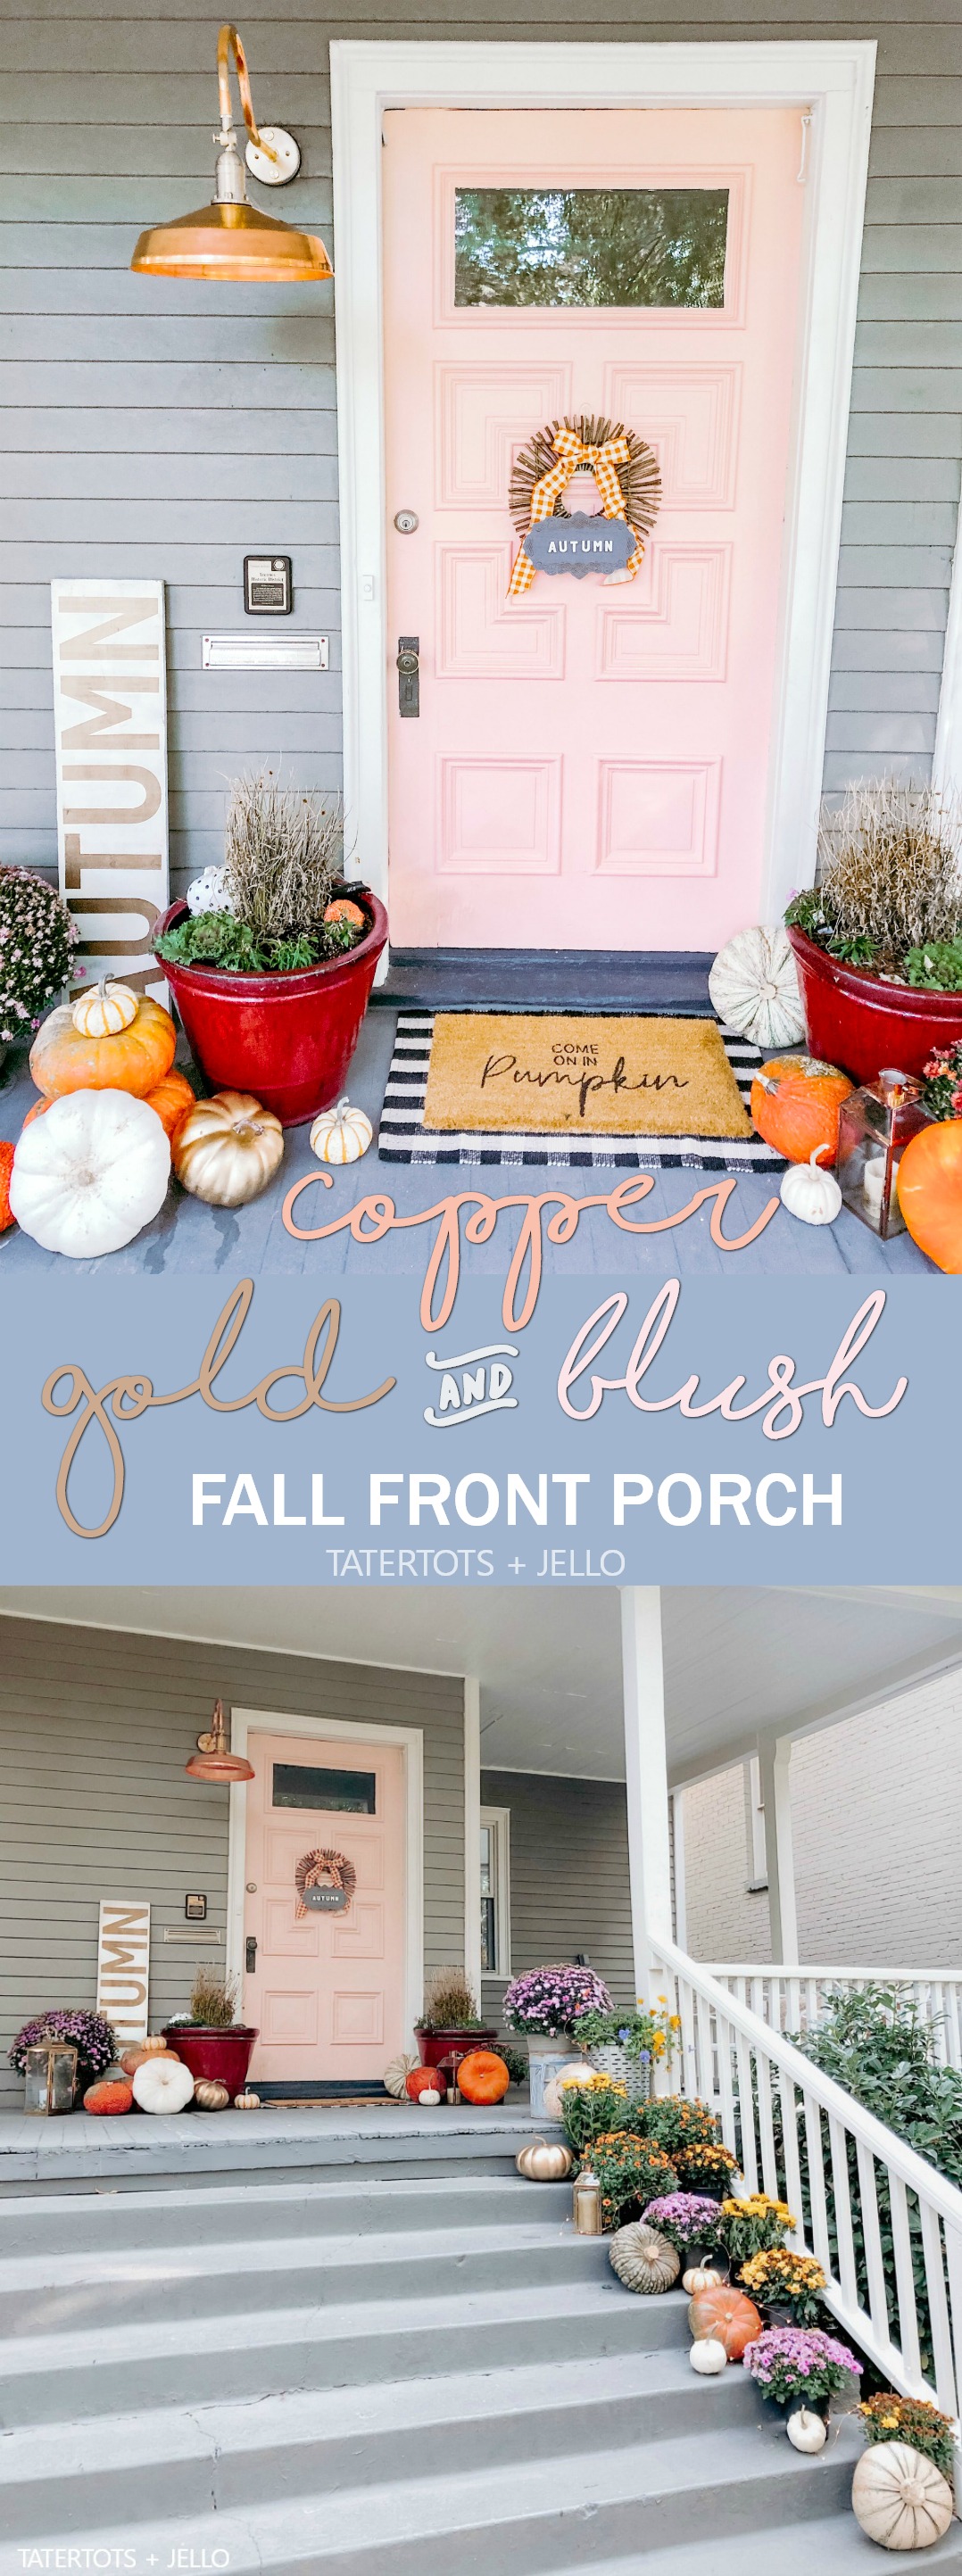 Copper, Gold and Blush Fall Porch Decorating Ideas! Celebrate Fall with a metallic pop of copper, gold and Blush. Easy ways to create a welcoming Autumn porch. 